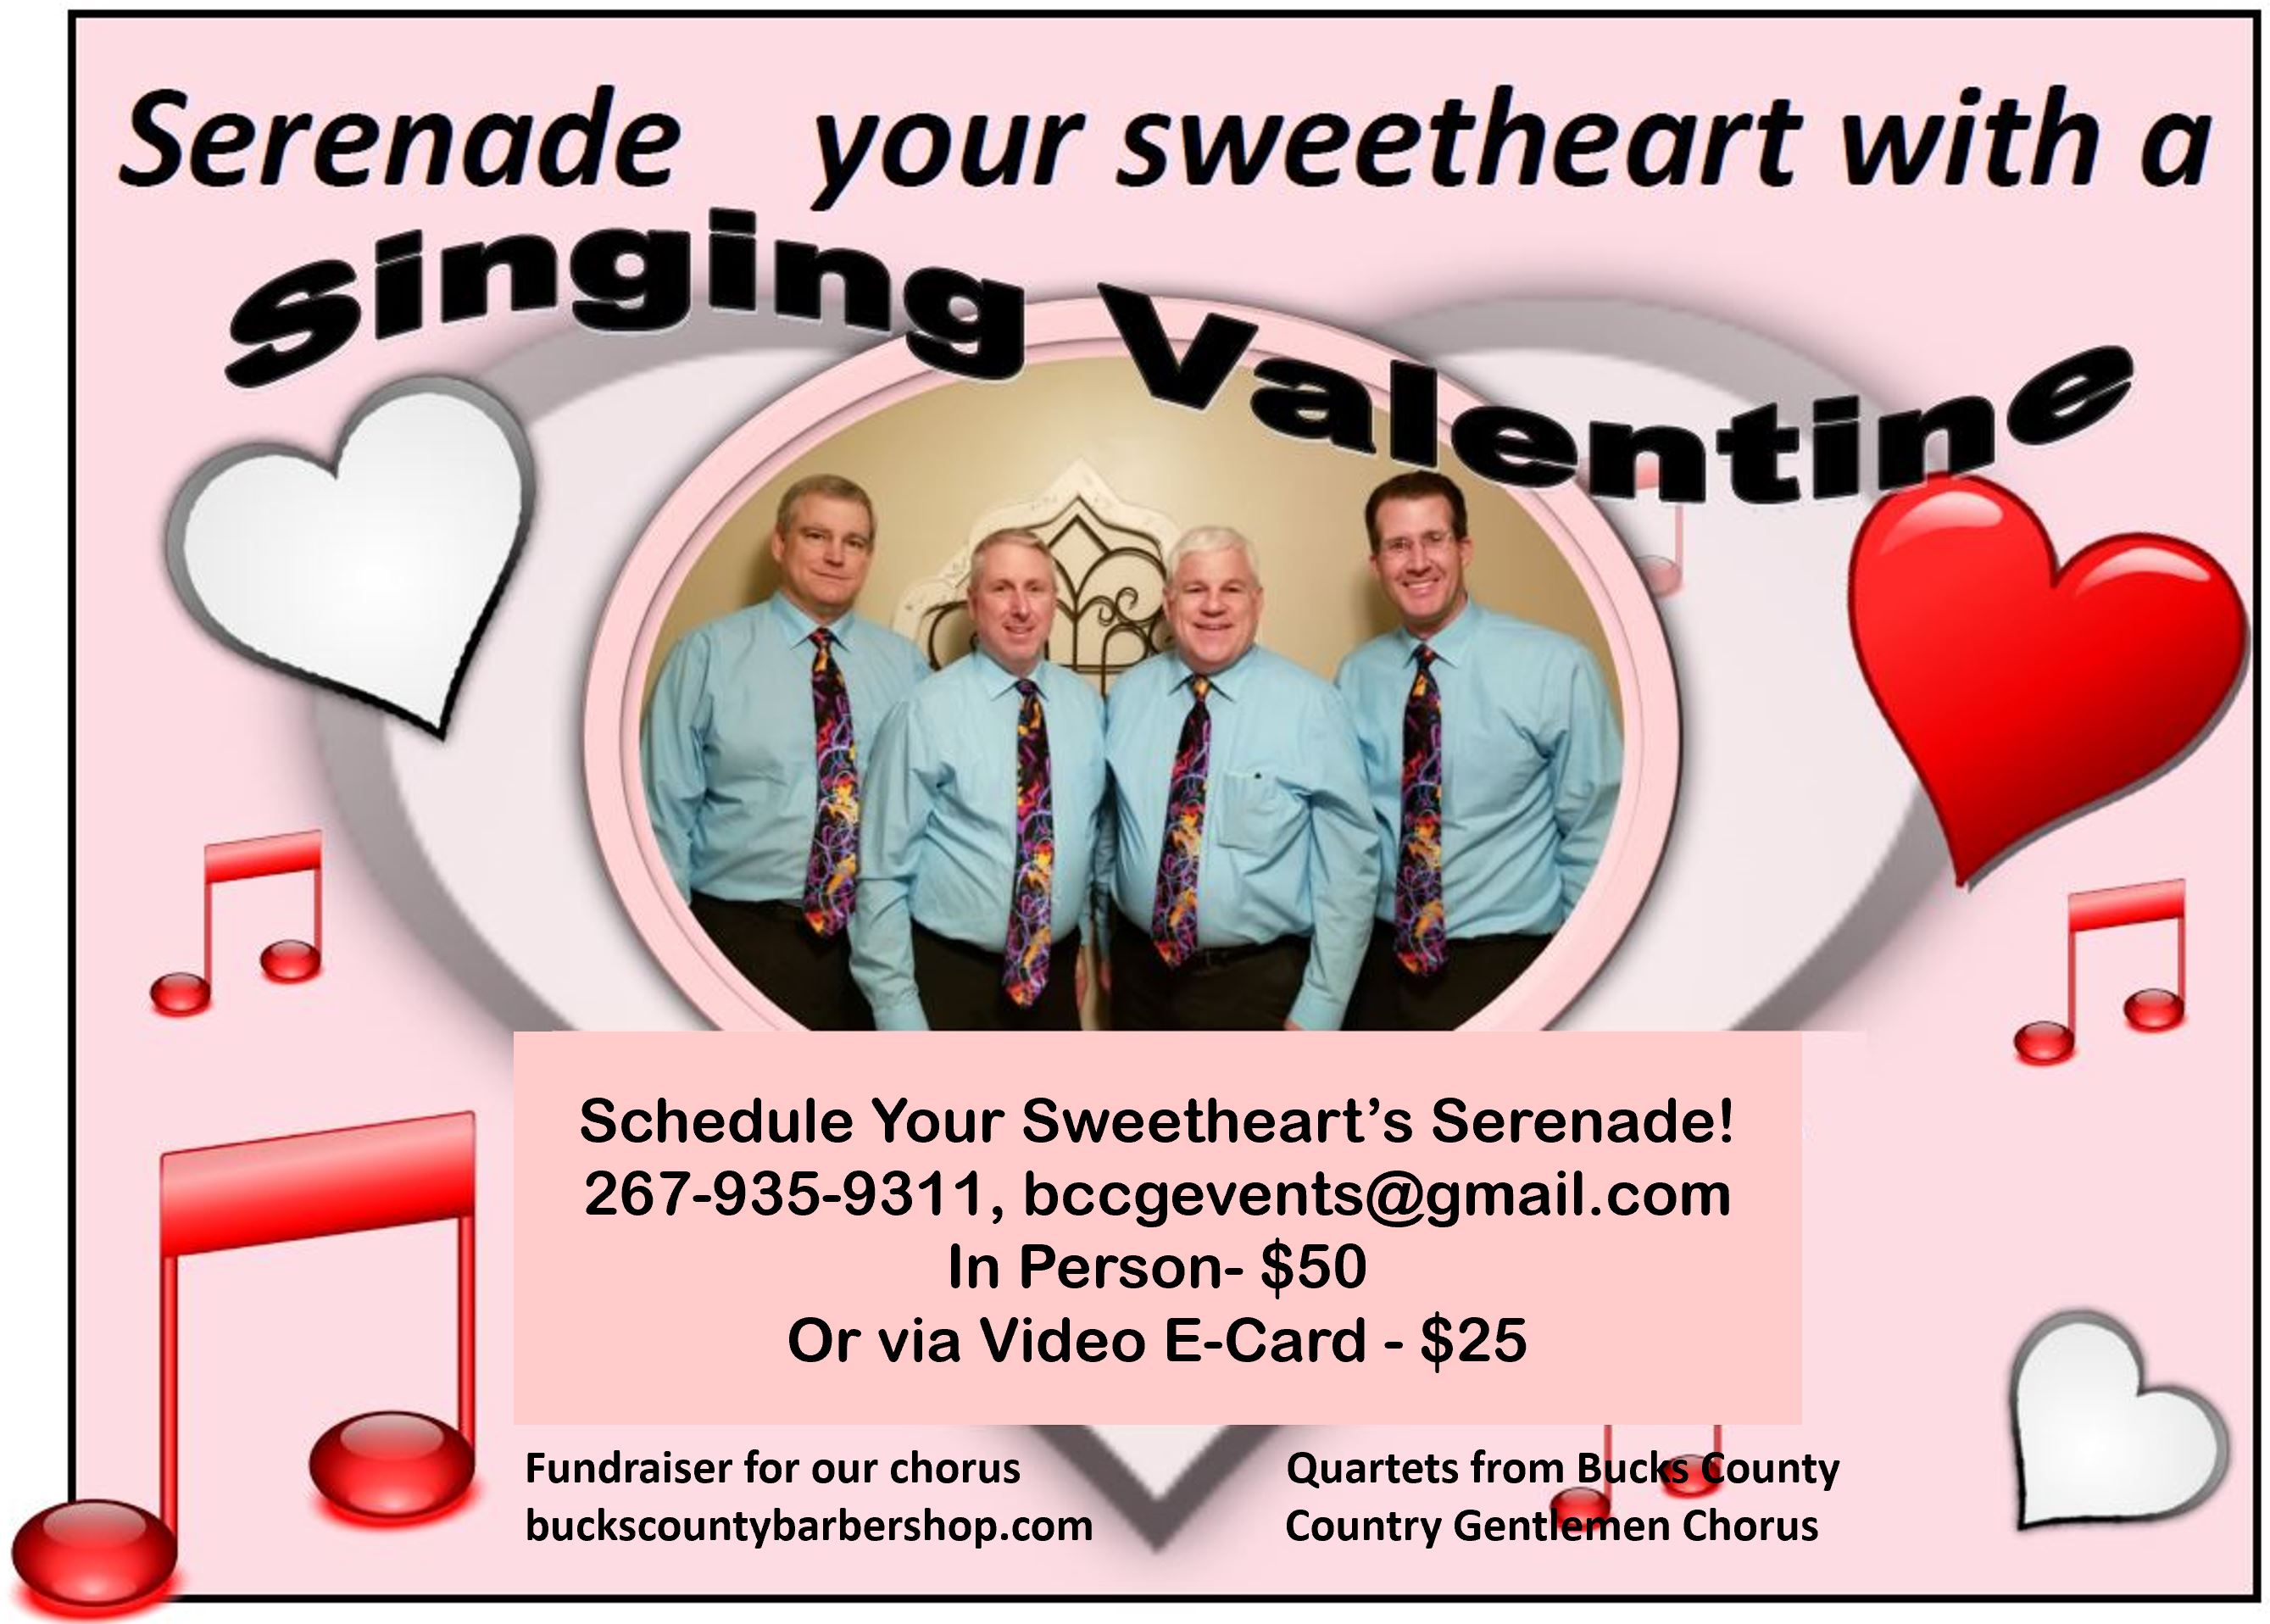 Order Your Singing Valentine Early!  Reserve Now!